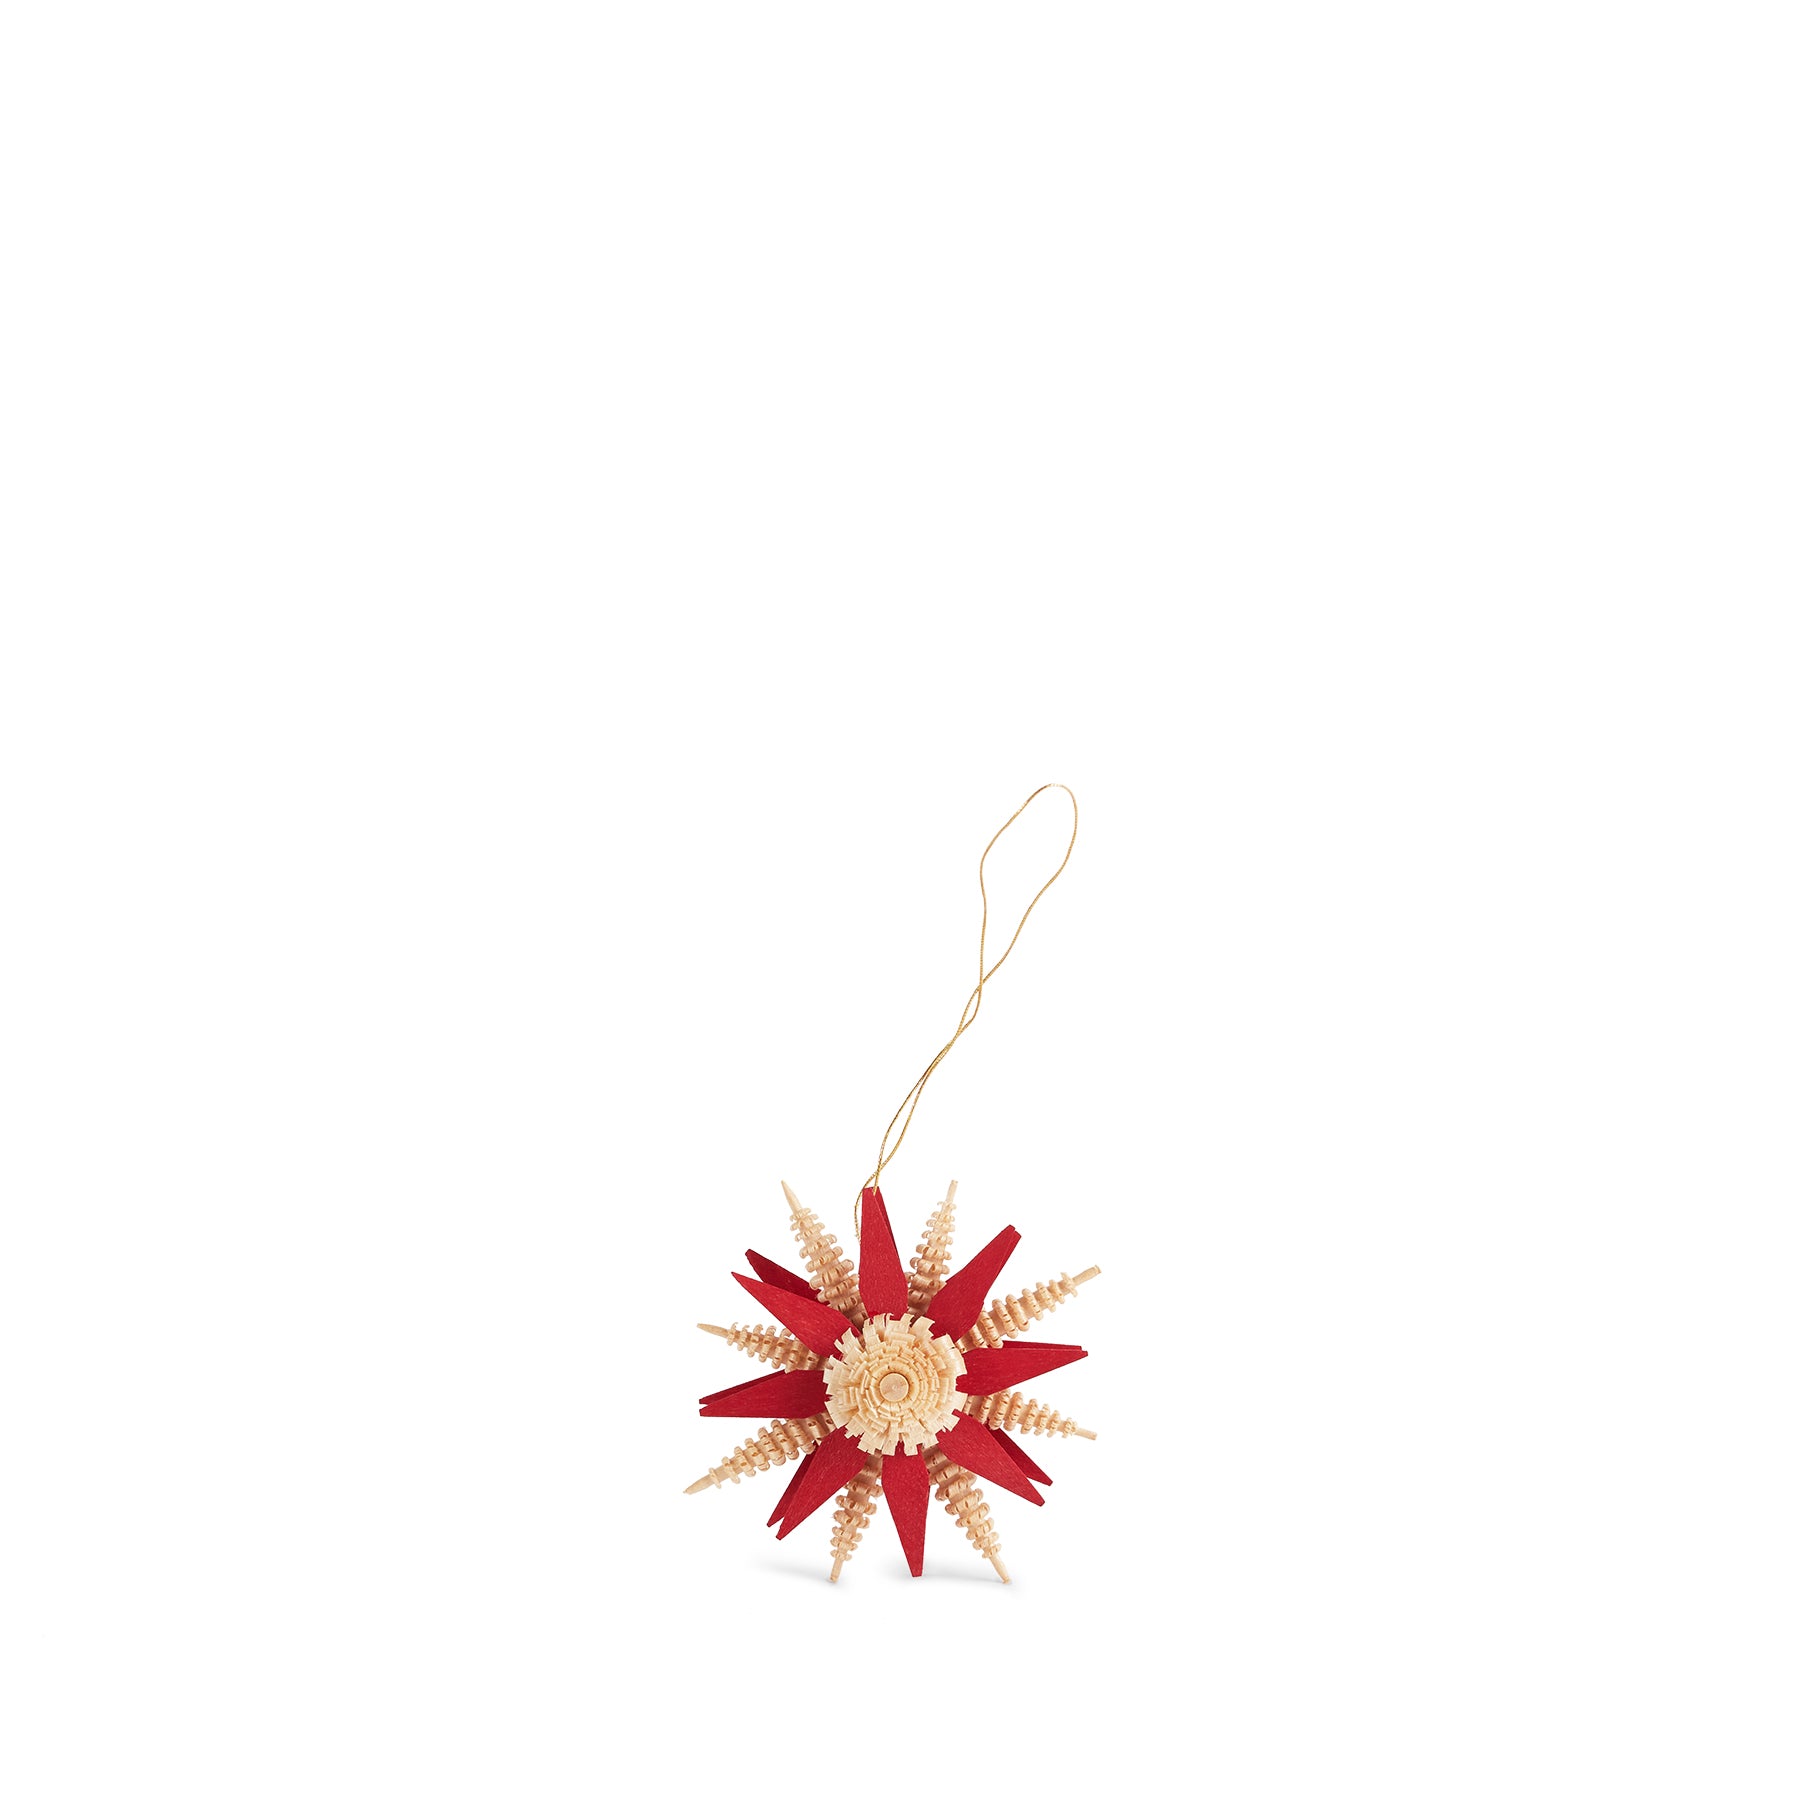 Star Ornament in Natural/Red, 2.75" Zoom Image 1